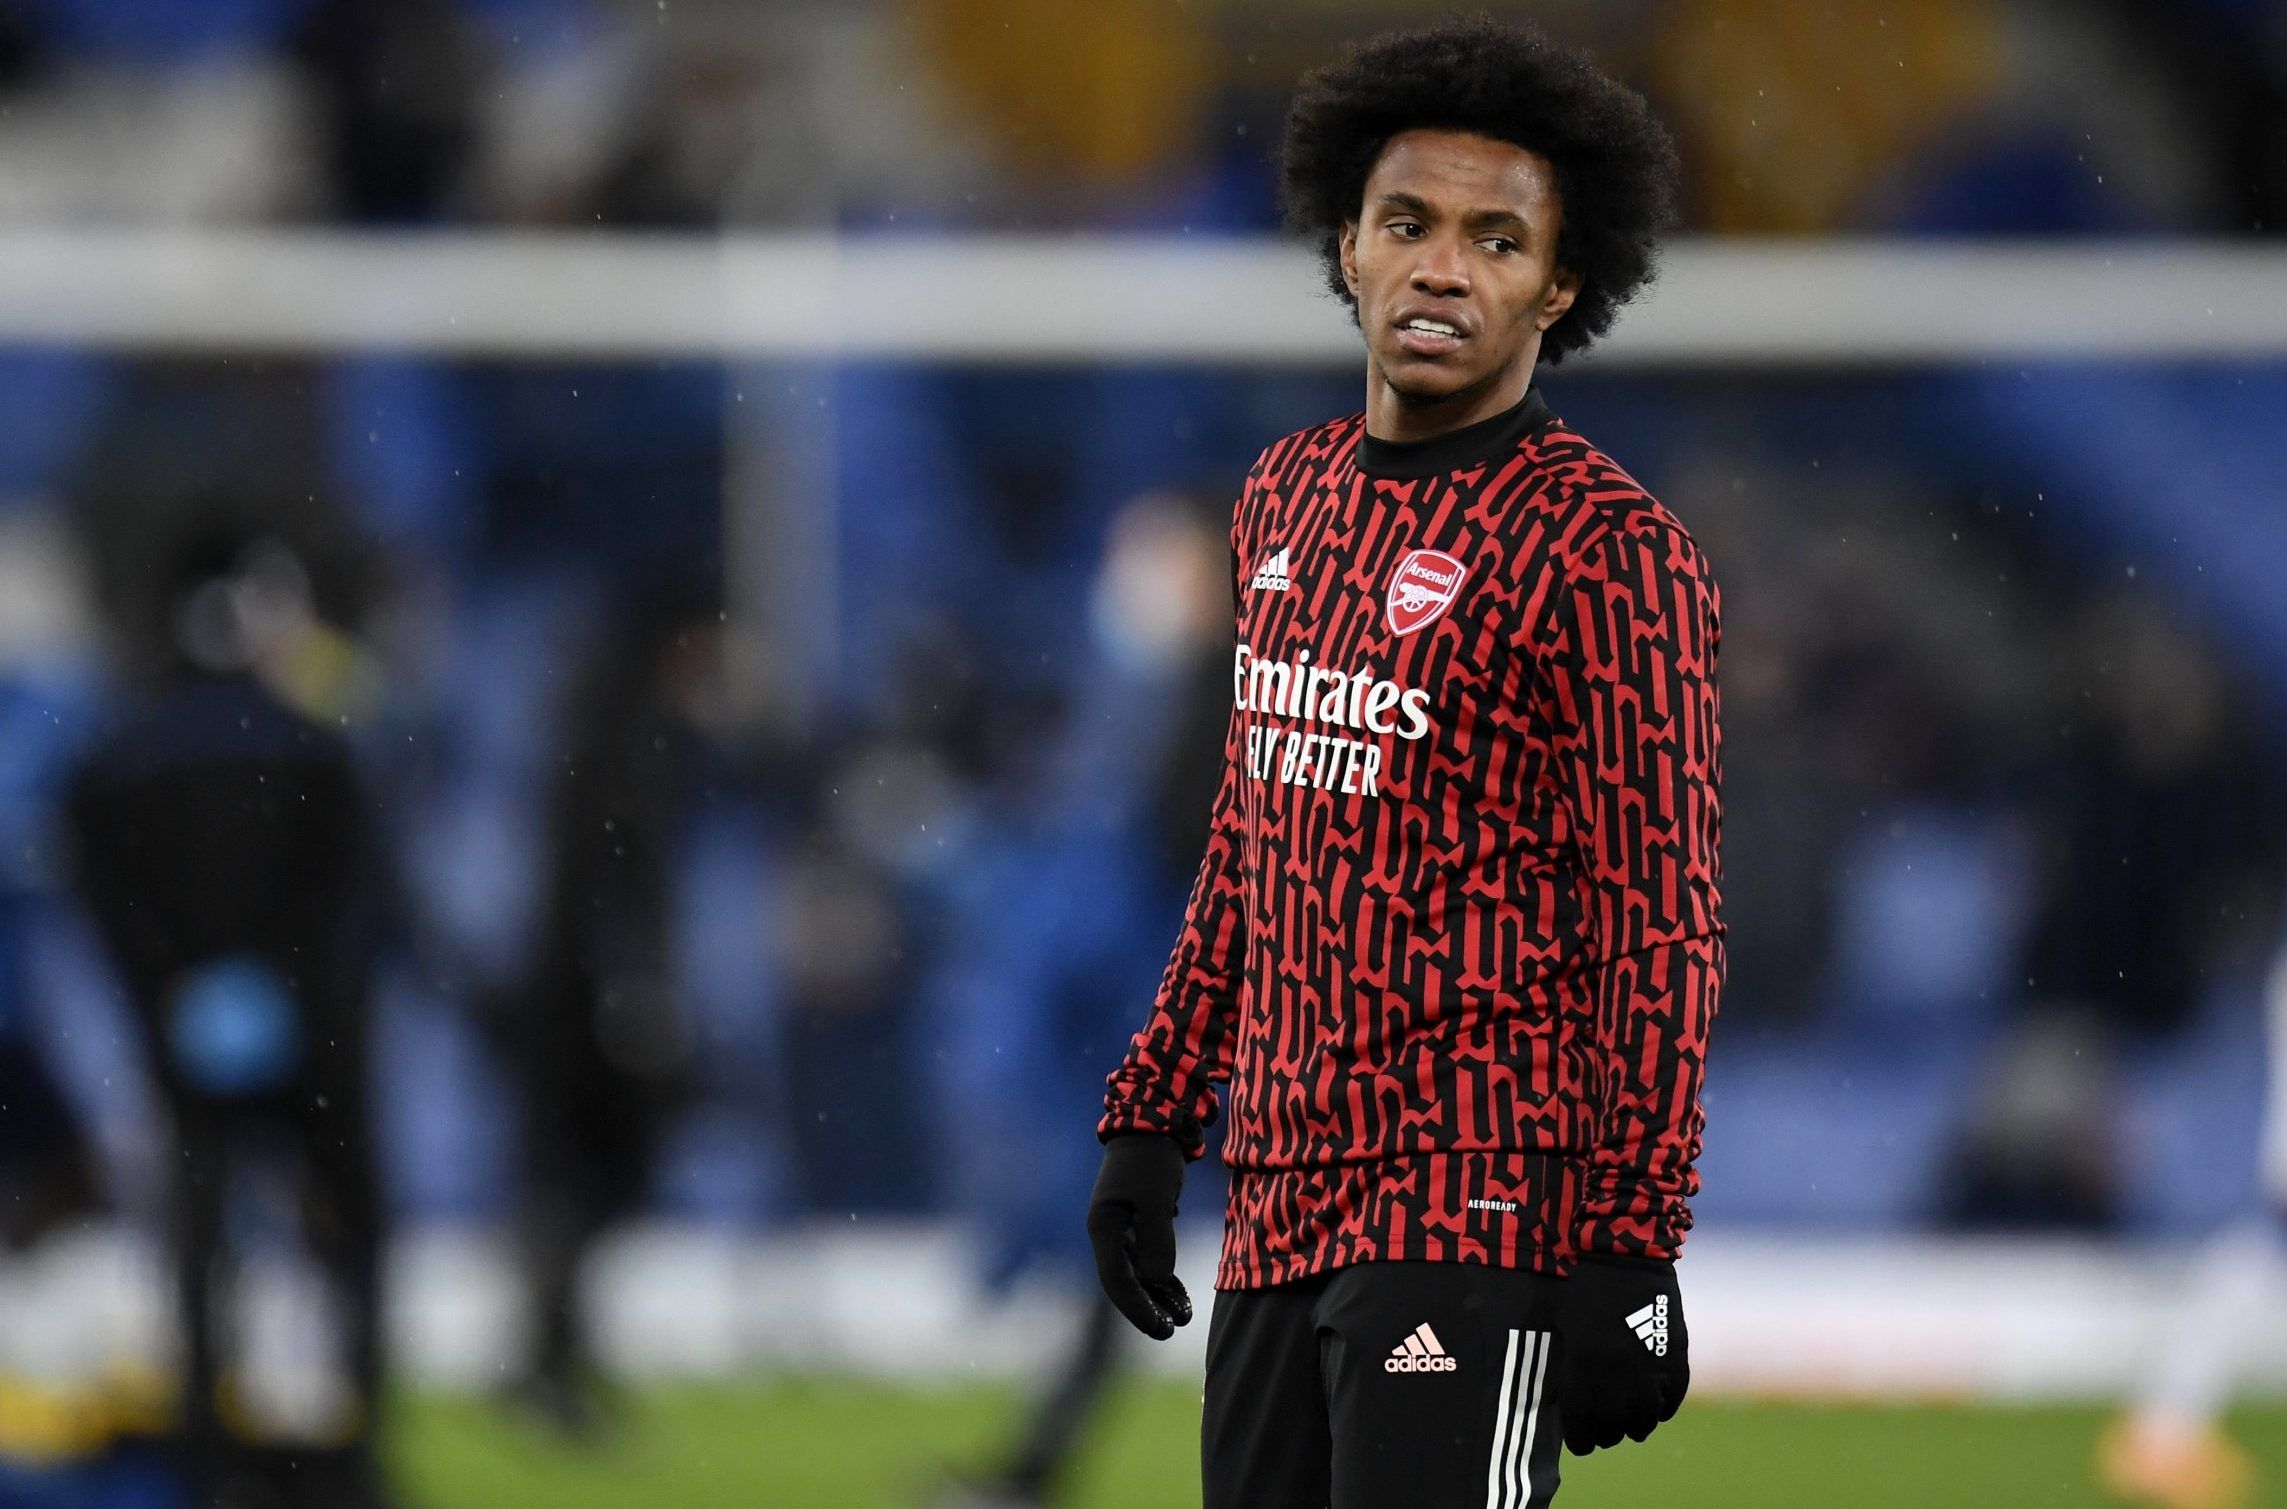 Arsenal winger Willian during warm up before Premier League clash with Everton at Goodison Park